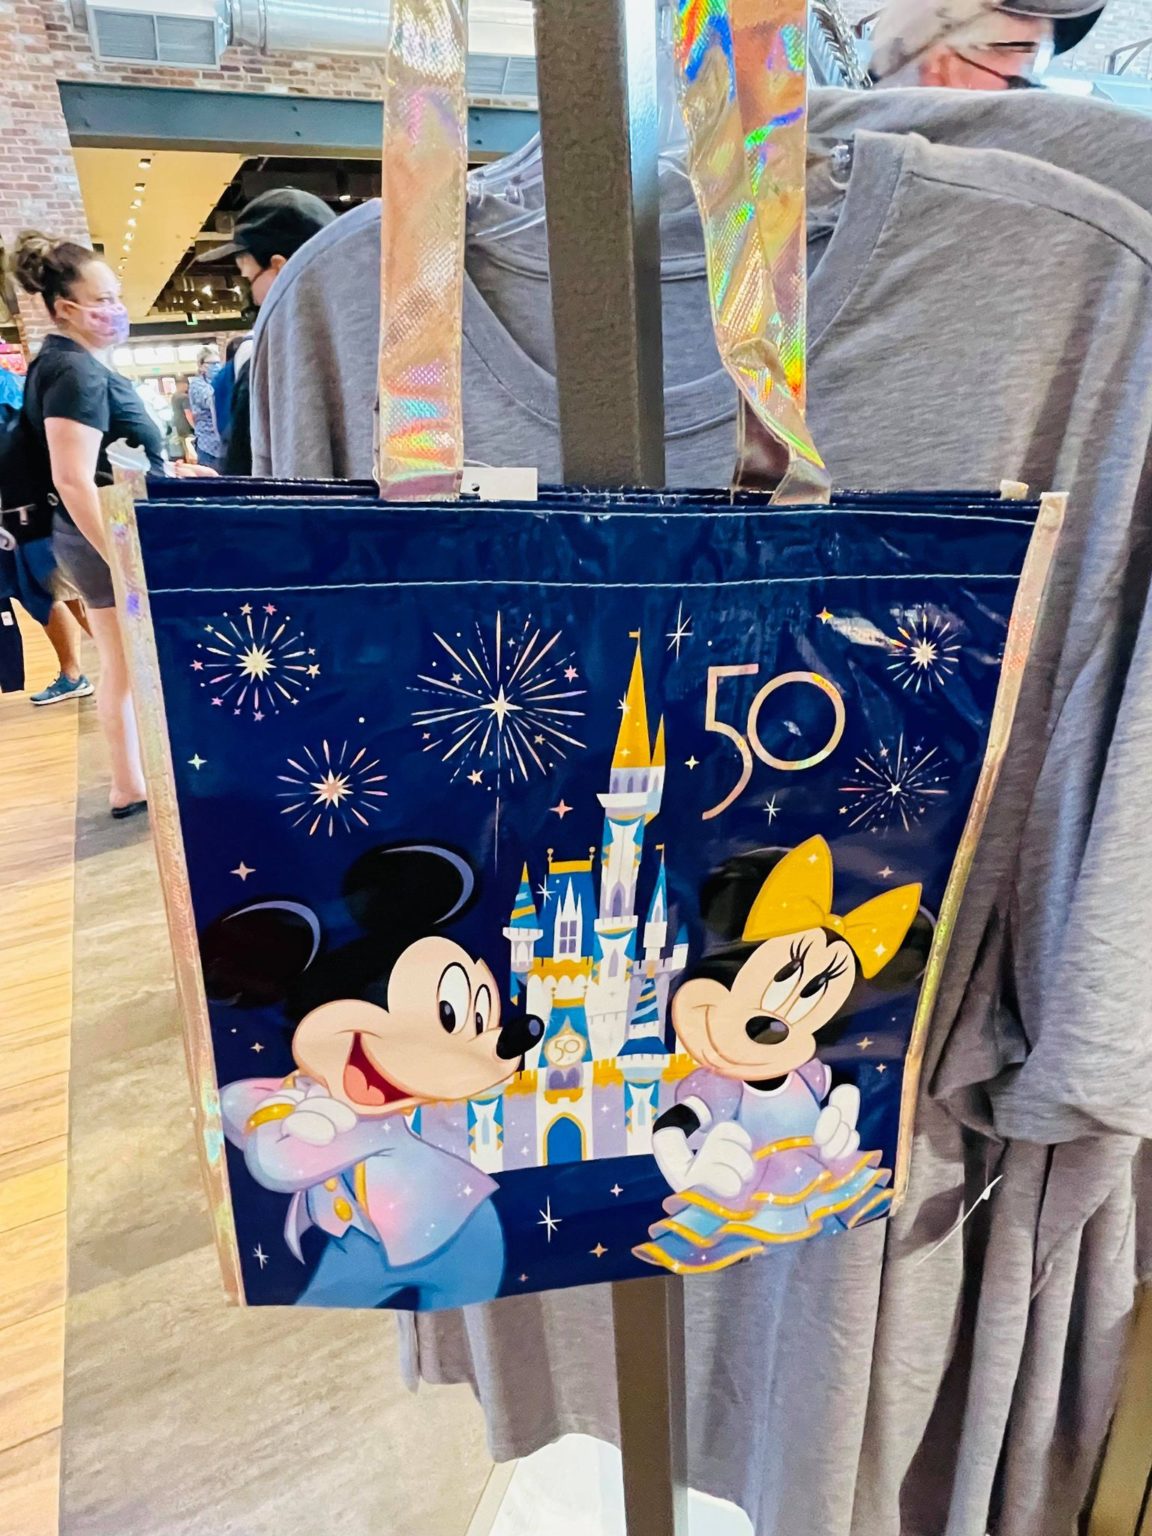 The Most Magical Reusable Bags Fly into Walt Disney World for the 50th ...